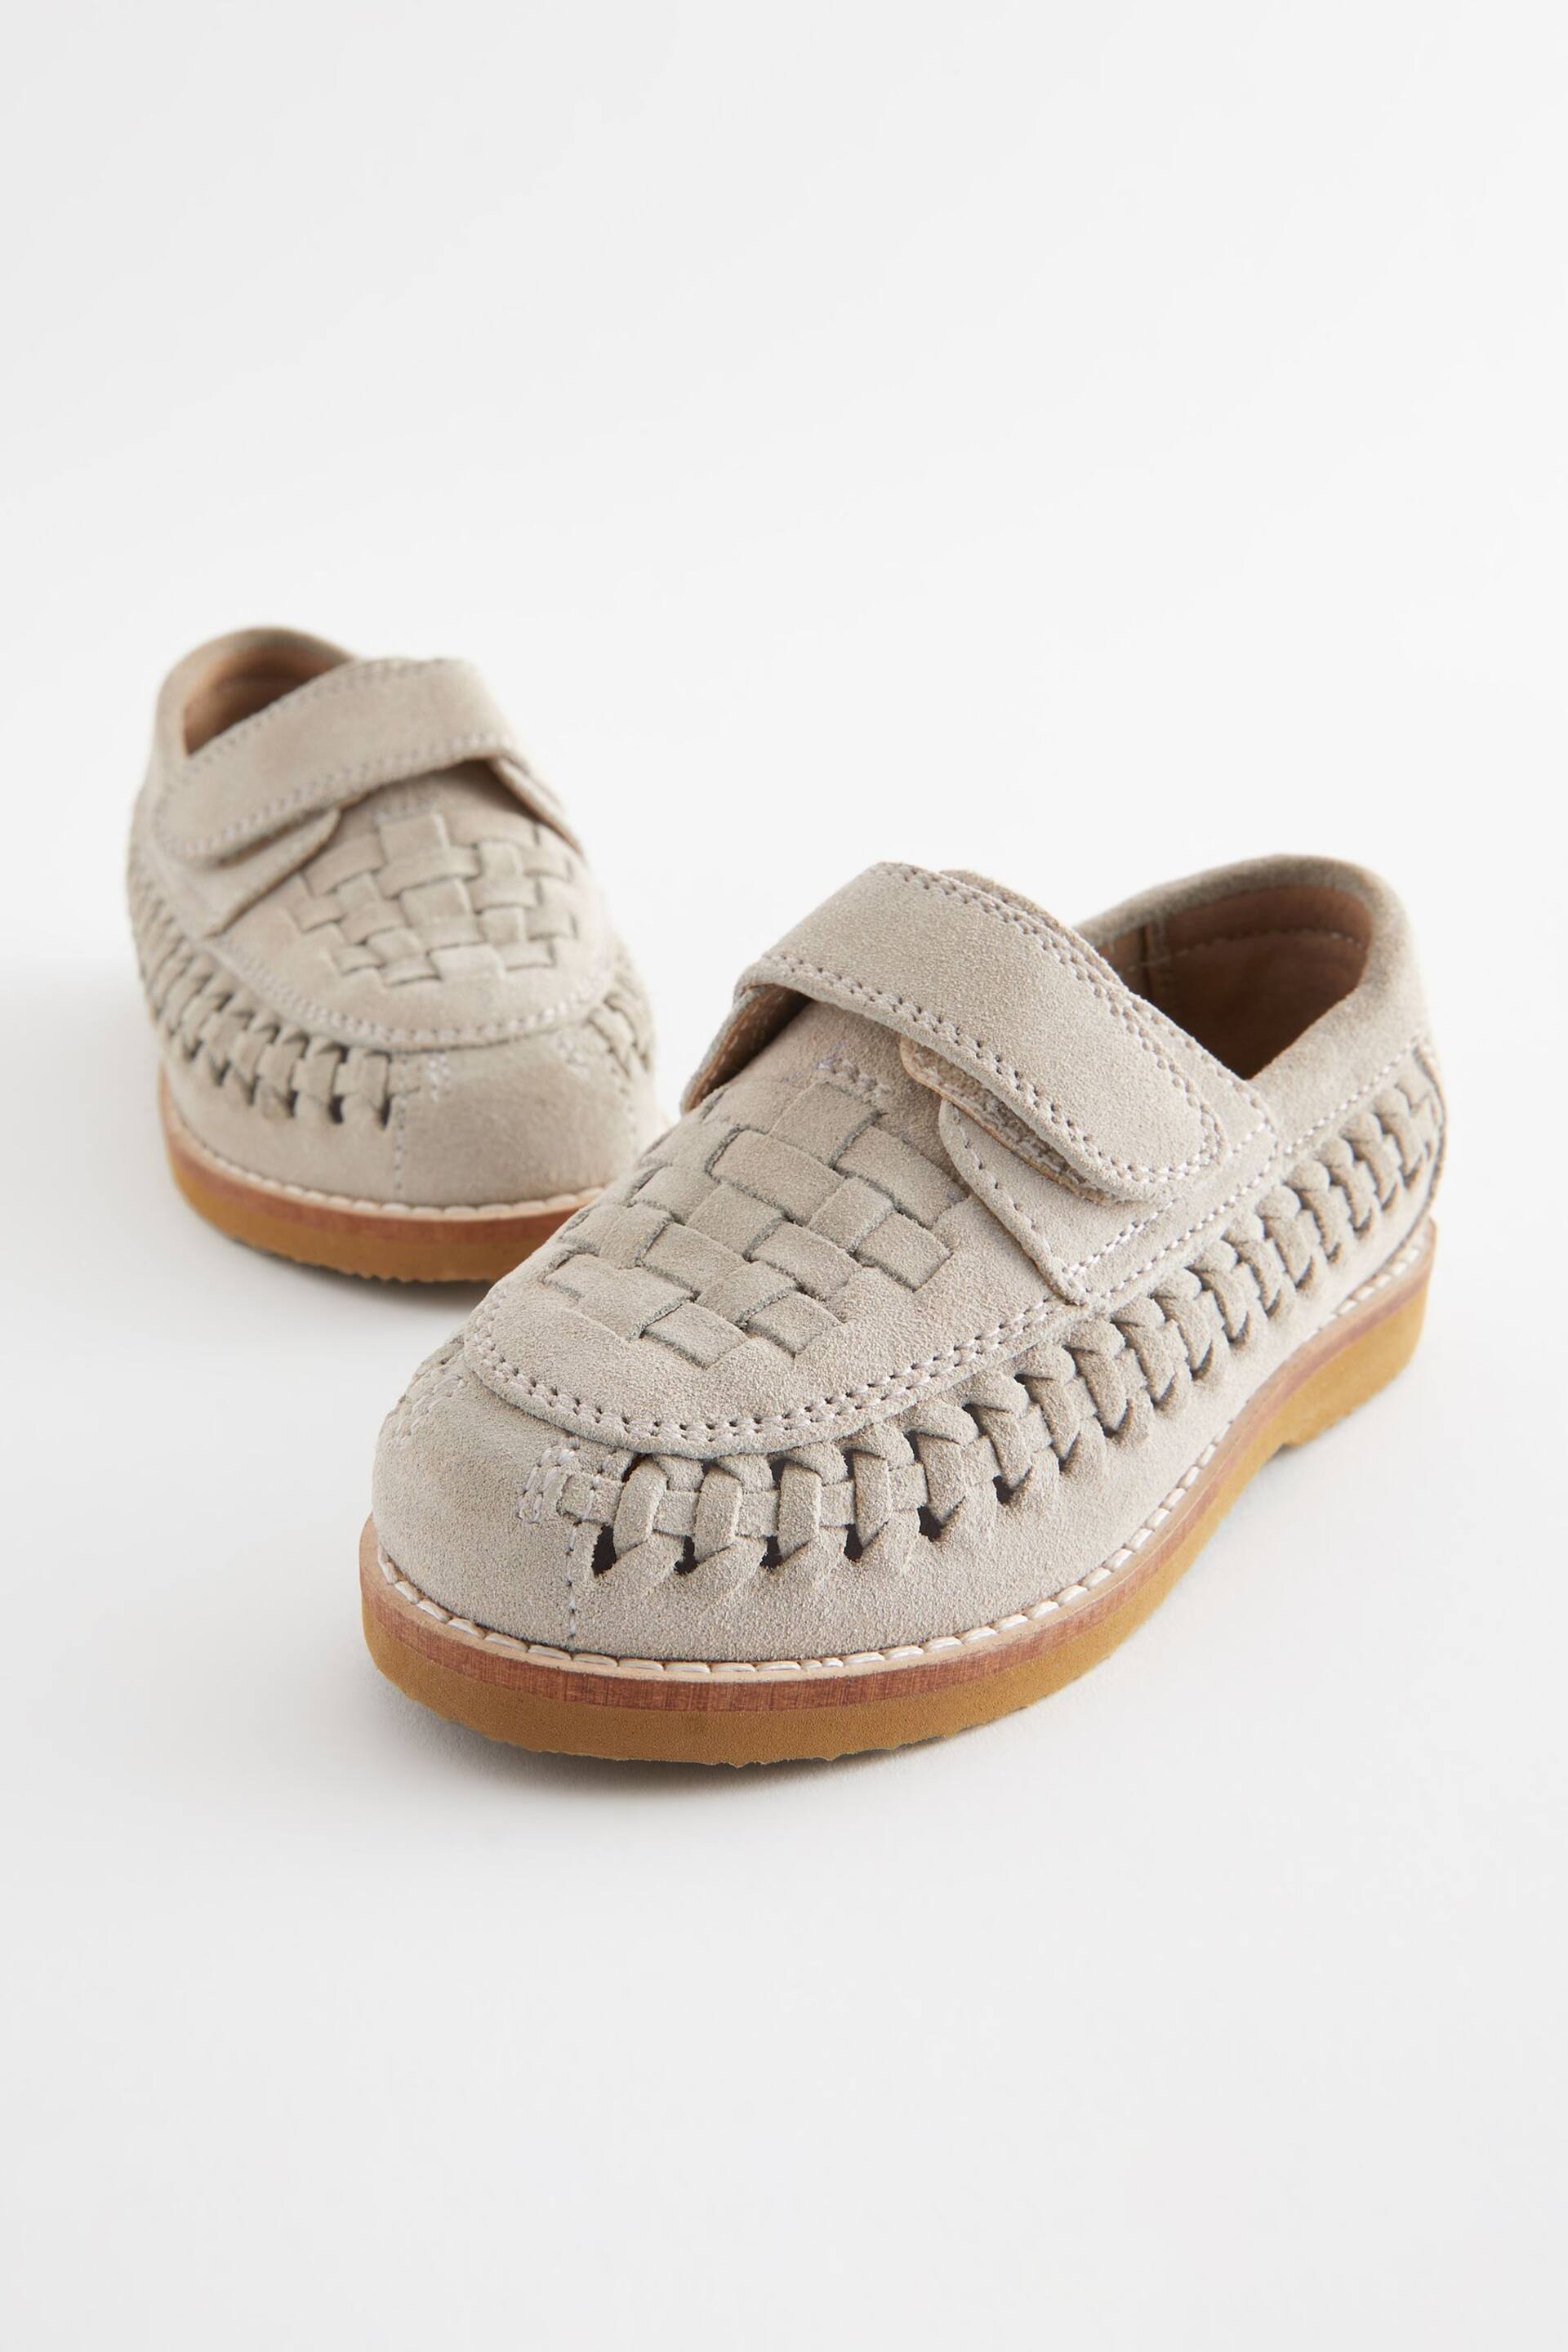 Stone Neutral Woven Loafers - Image 2 of 5